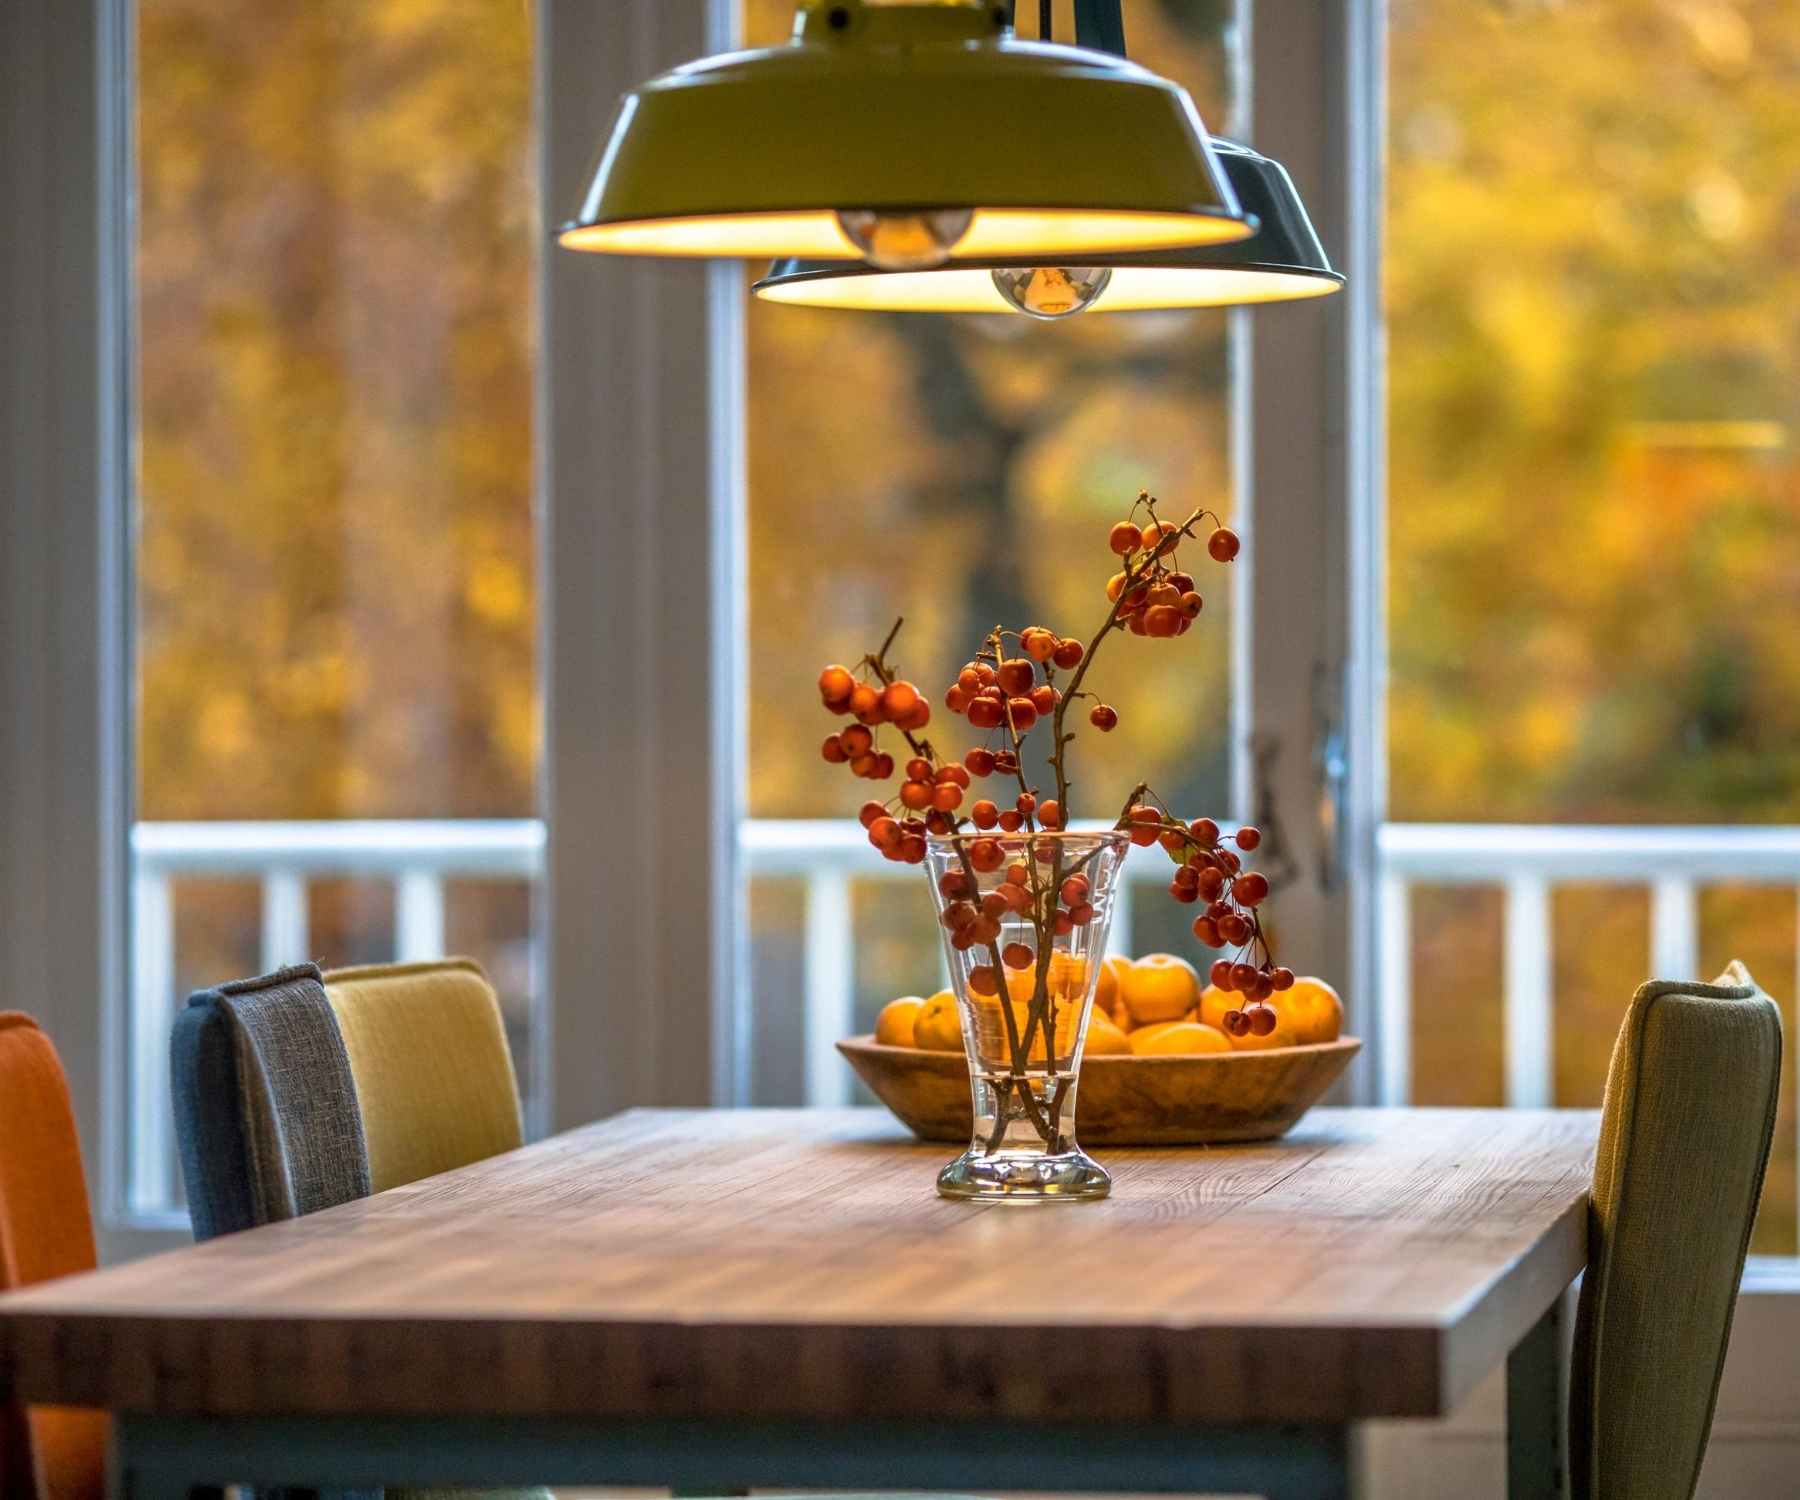 Wooden dining table with green pendant lighting and autumn berries